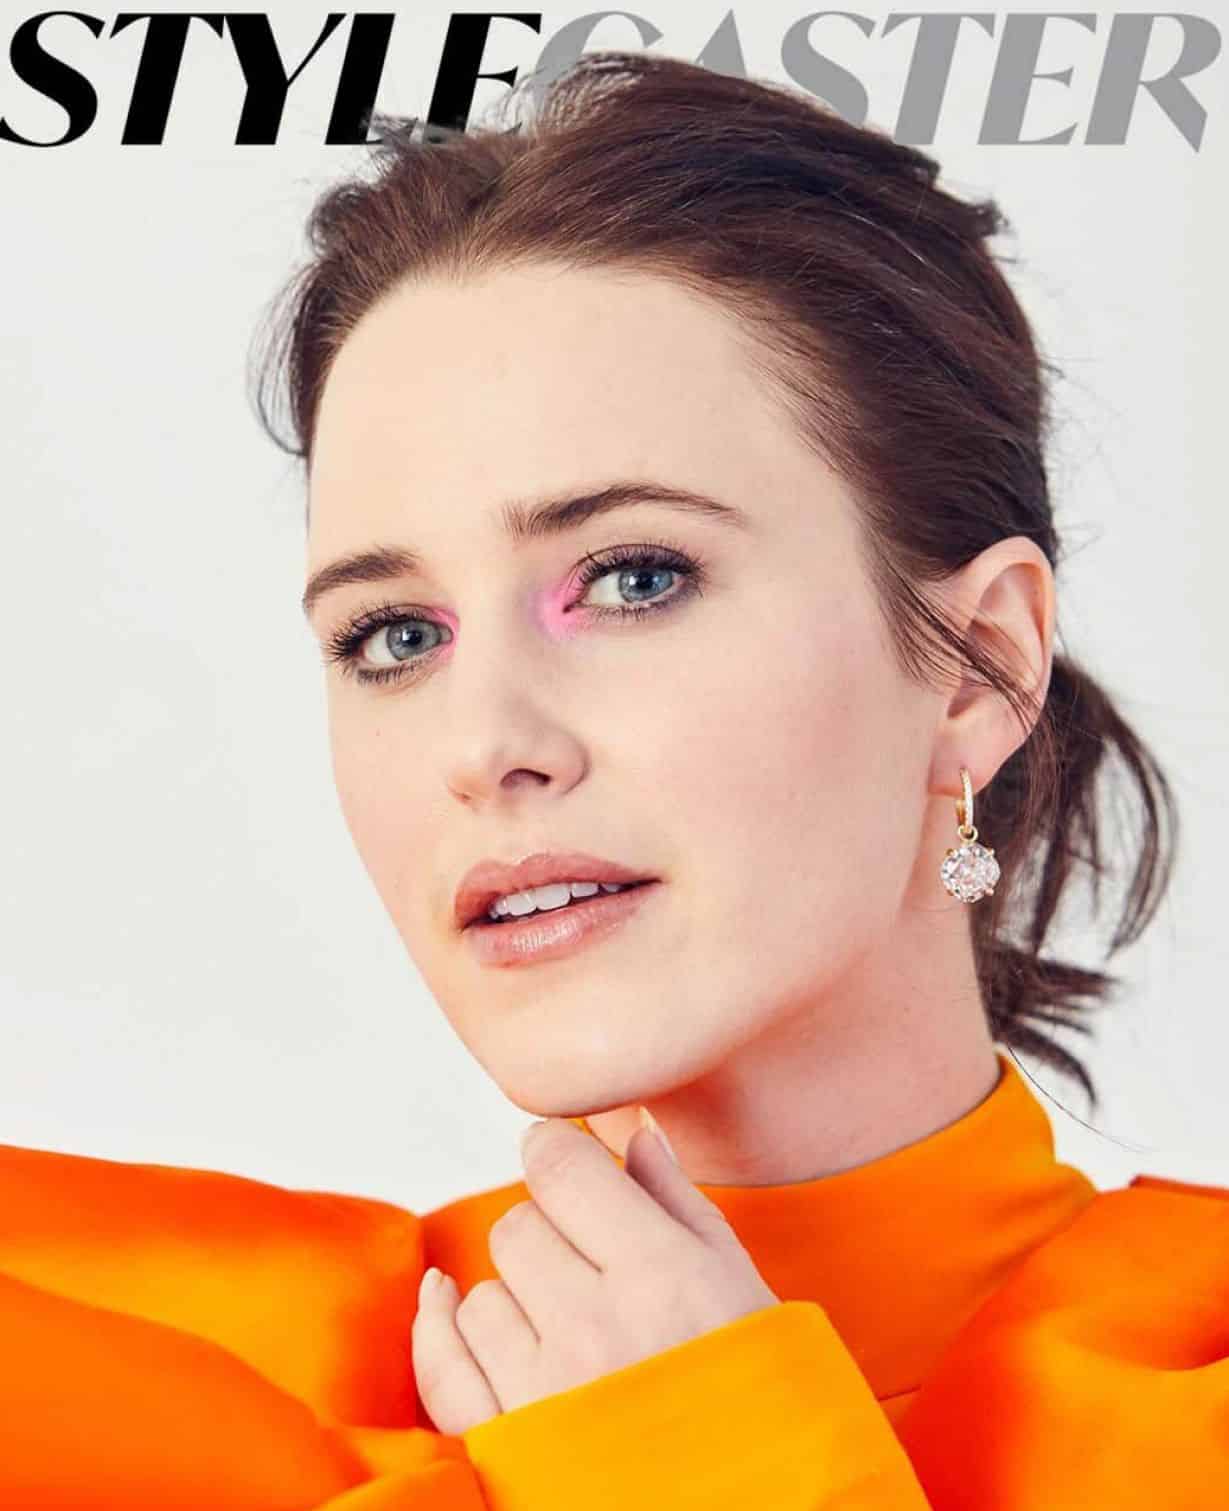 Rachel Brosnahan Posing in StyleCaster Magazine March 2022 Issue